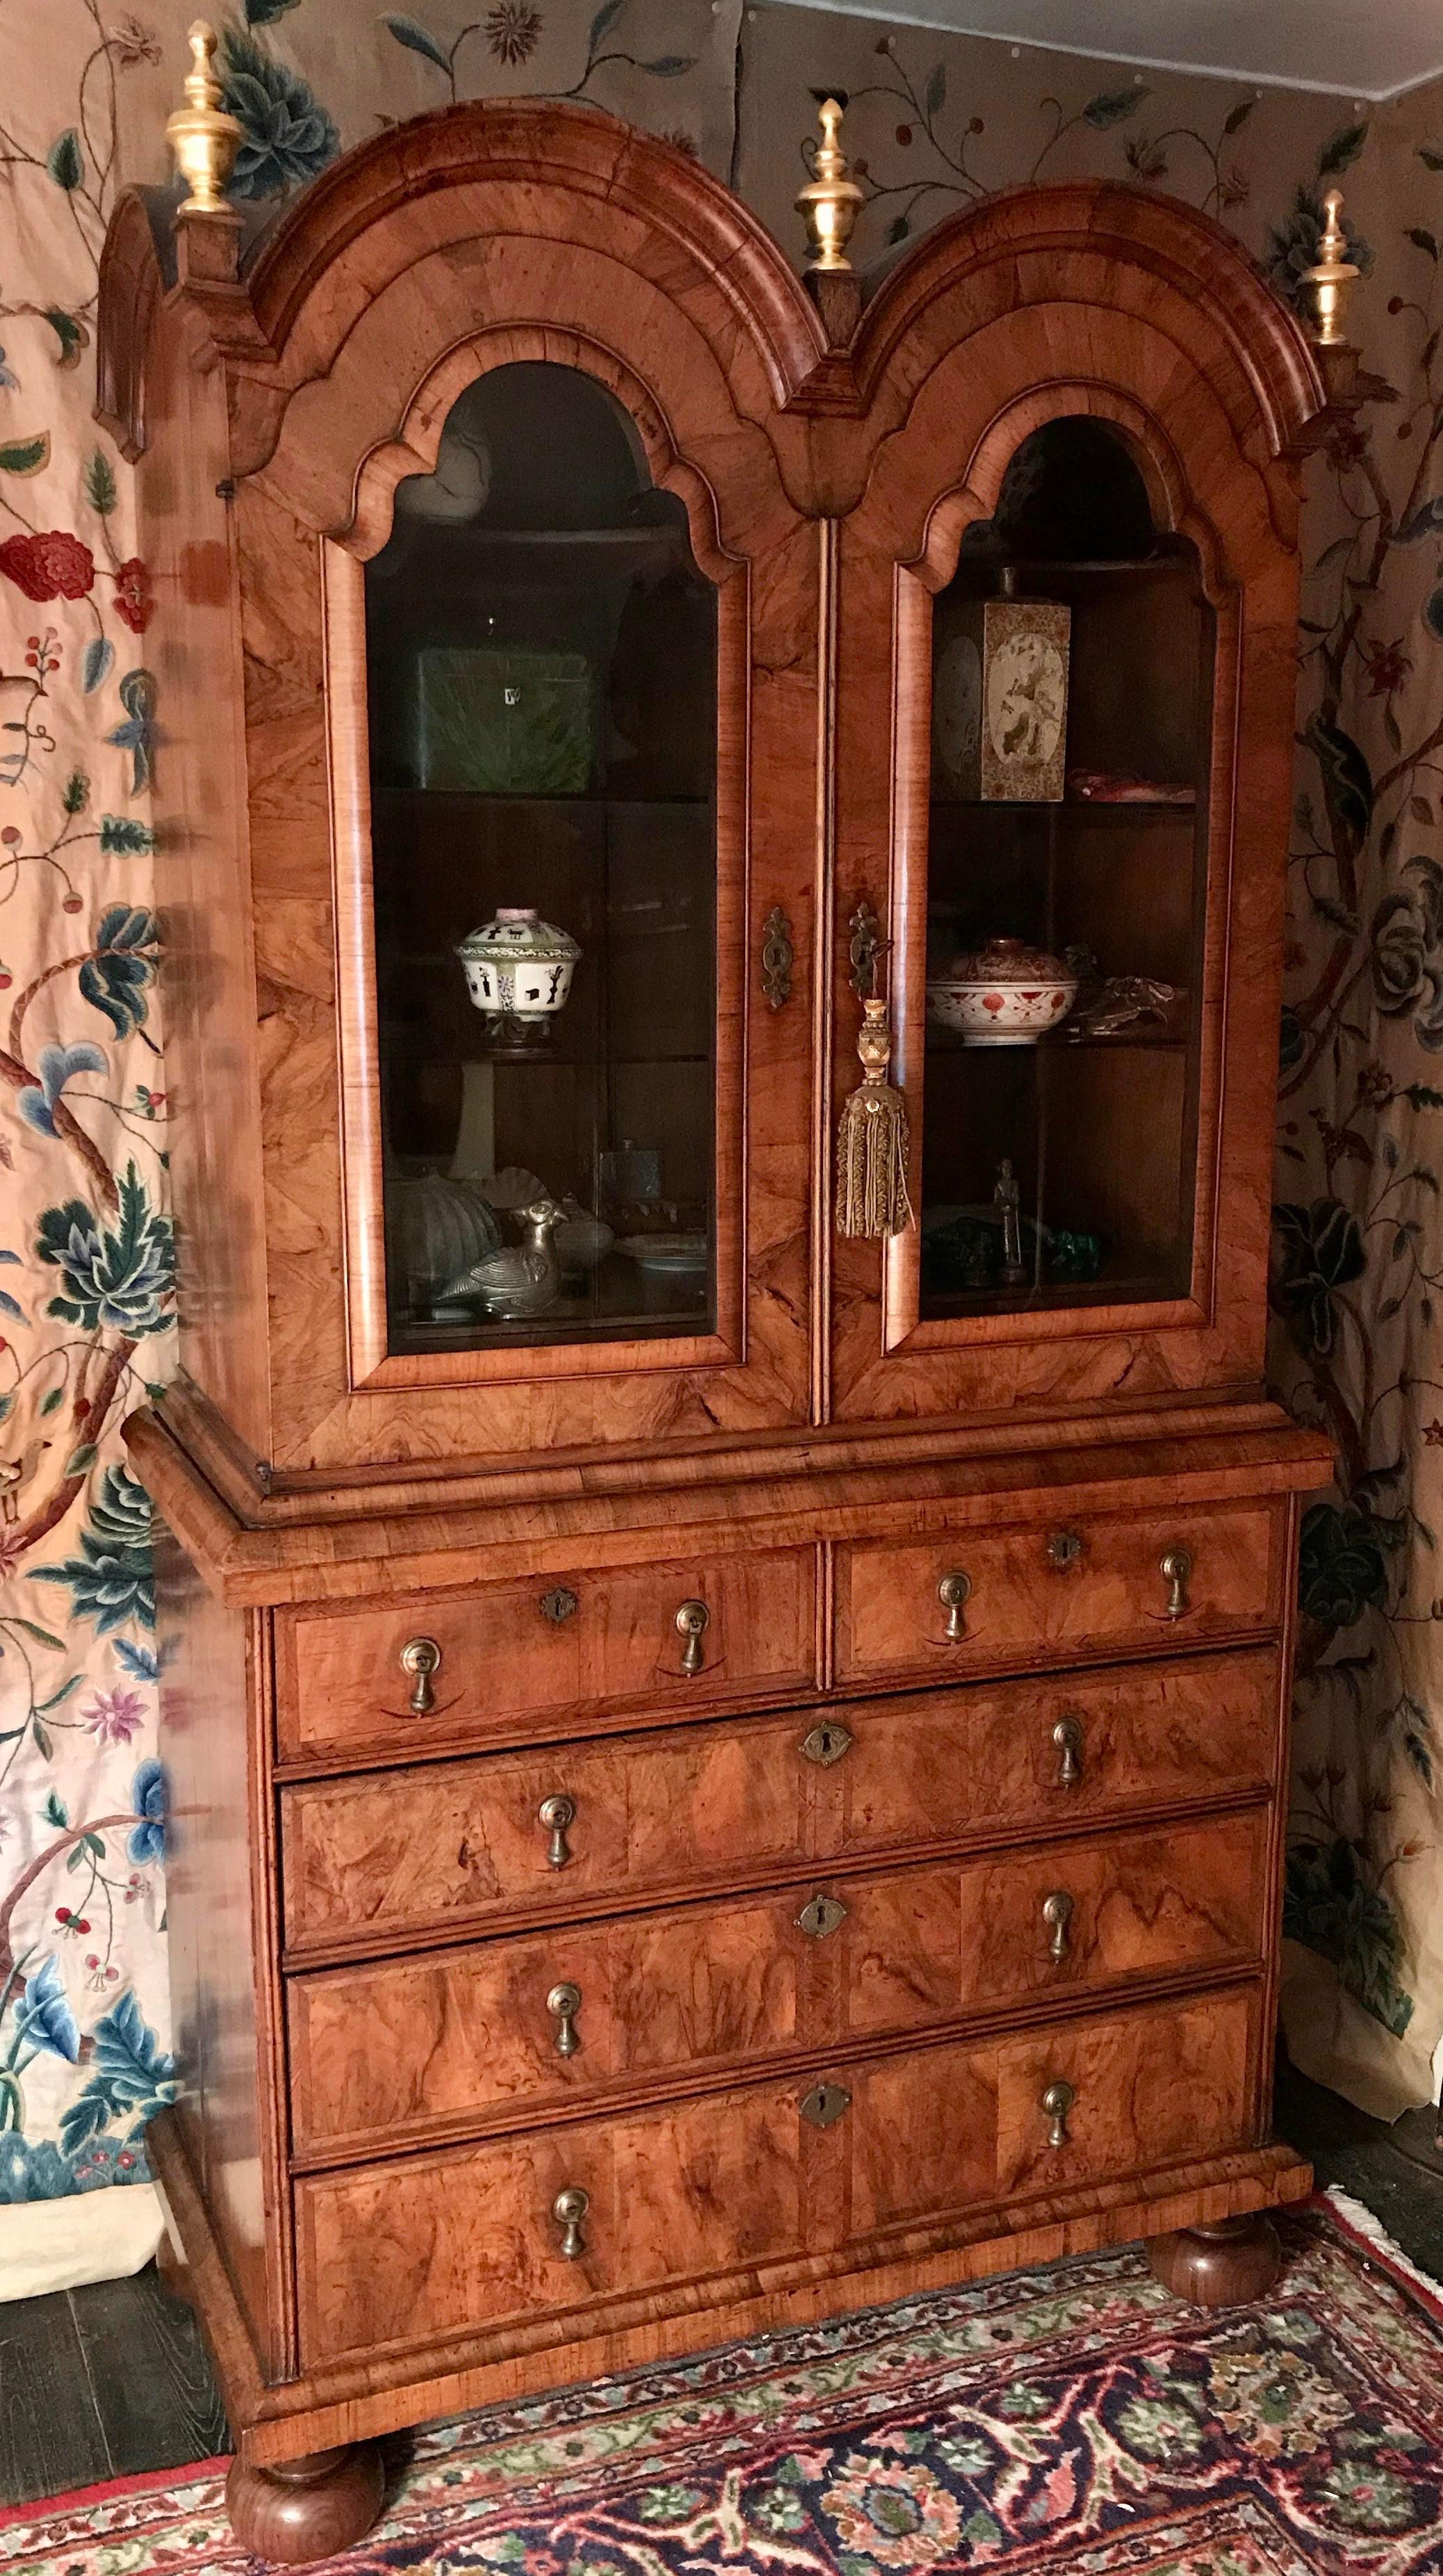 This early 18th century walnut bookcase is veneered throughout in figured walnut and is feather-banded. 

The bold cross-grain mouldings throughout are particularly well executed. The cabinet doors retain shallow, hand-bevelled glass. Bun feet